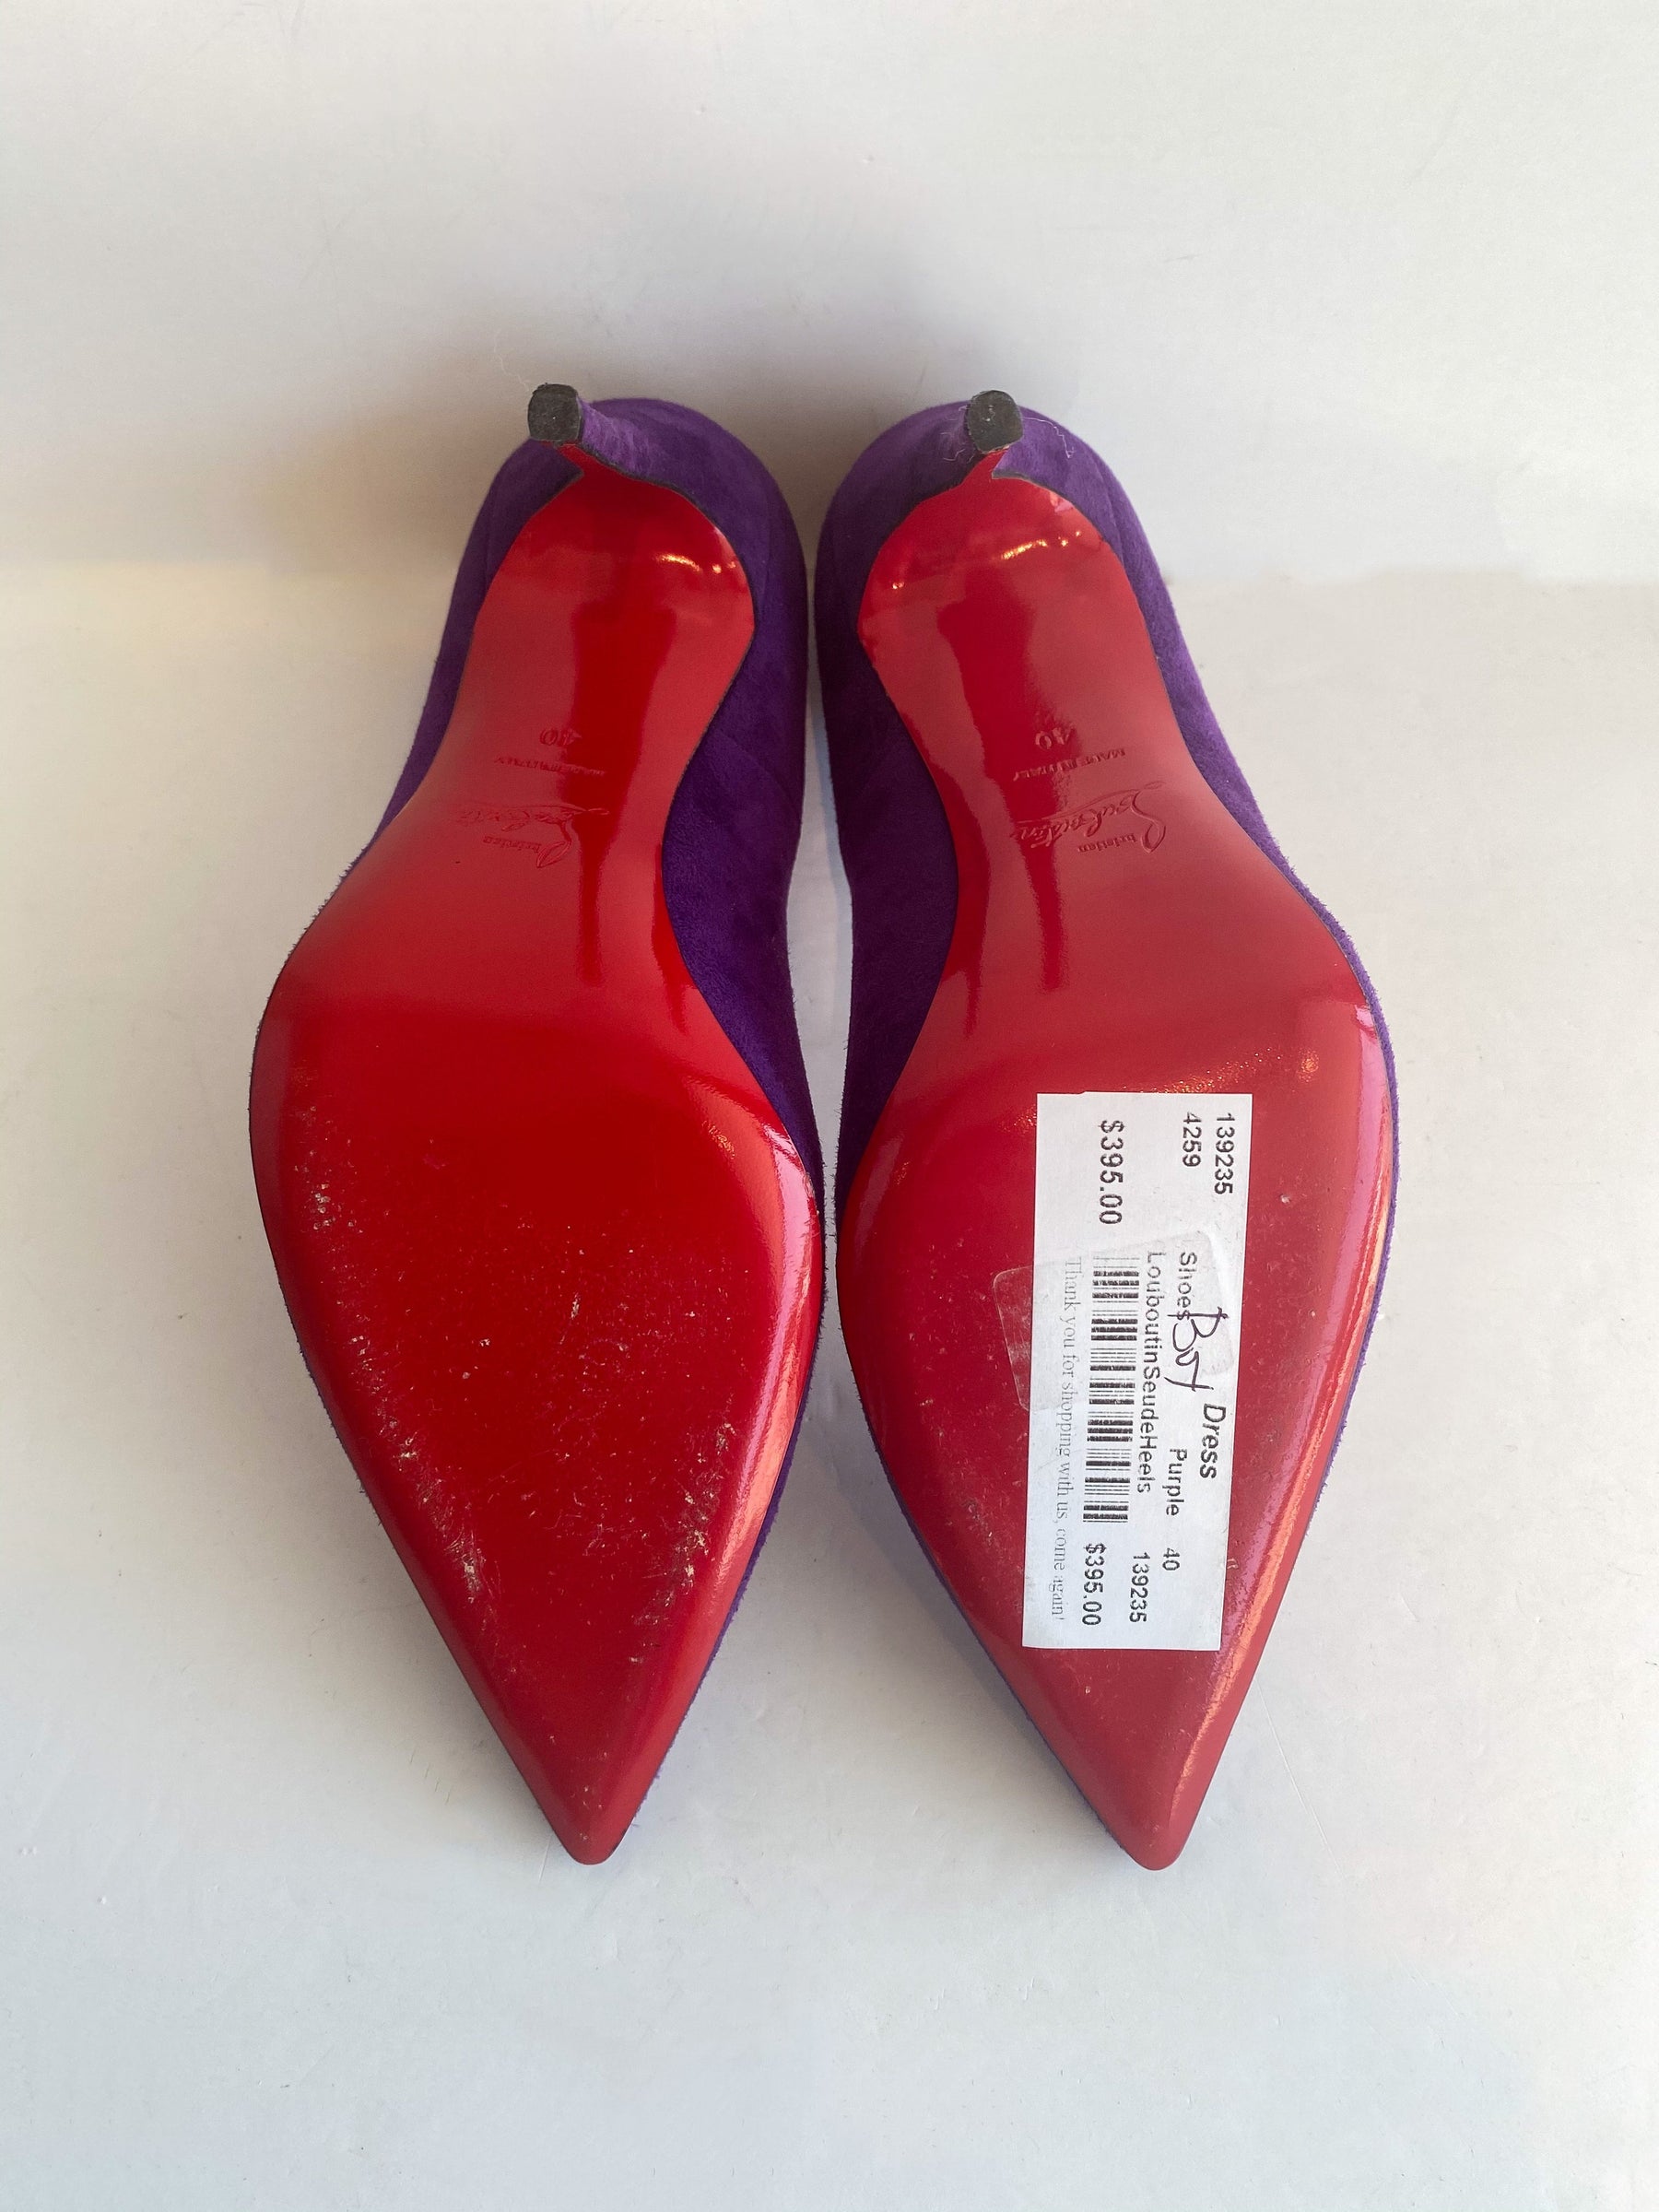 Christian Louboutin So Kate Suede Heels Violet Purple Bottom of Shoes